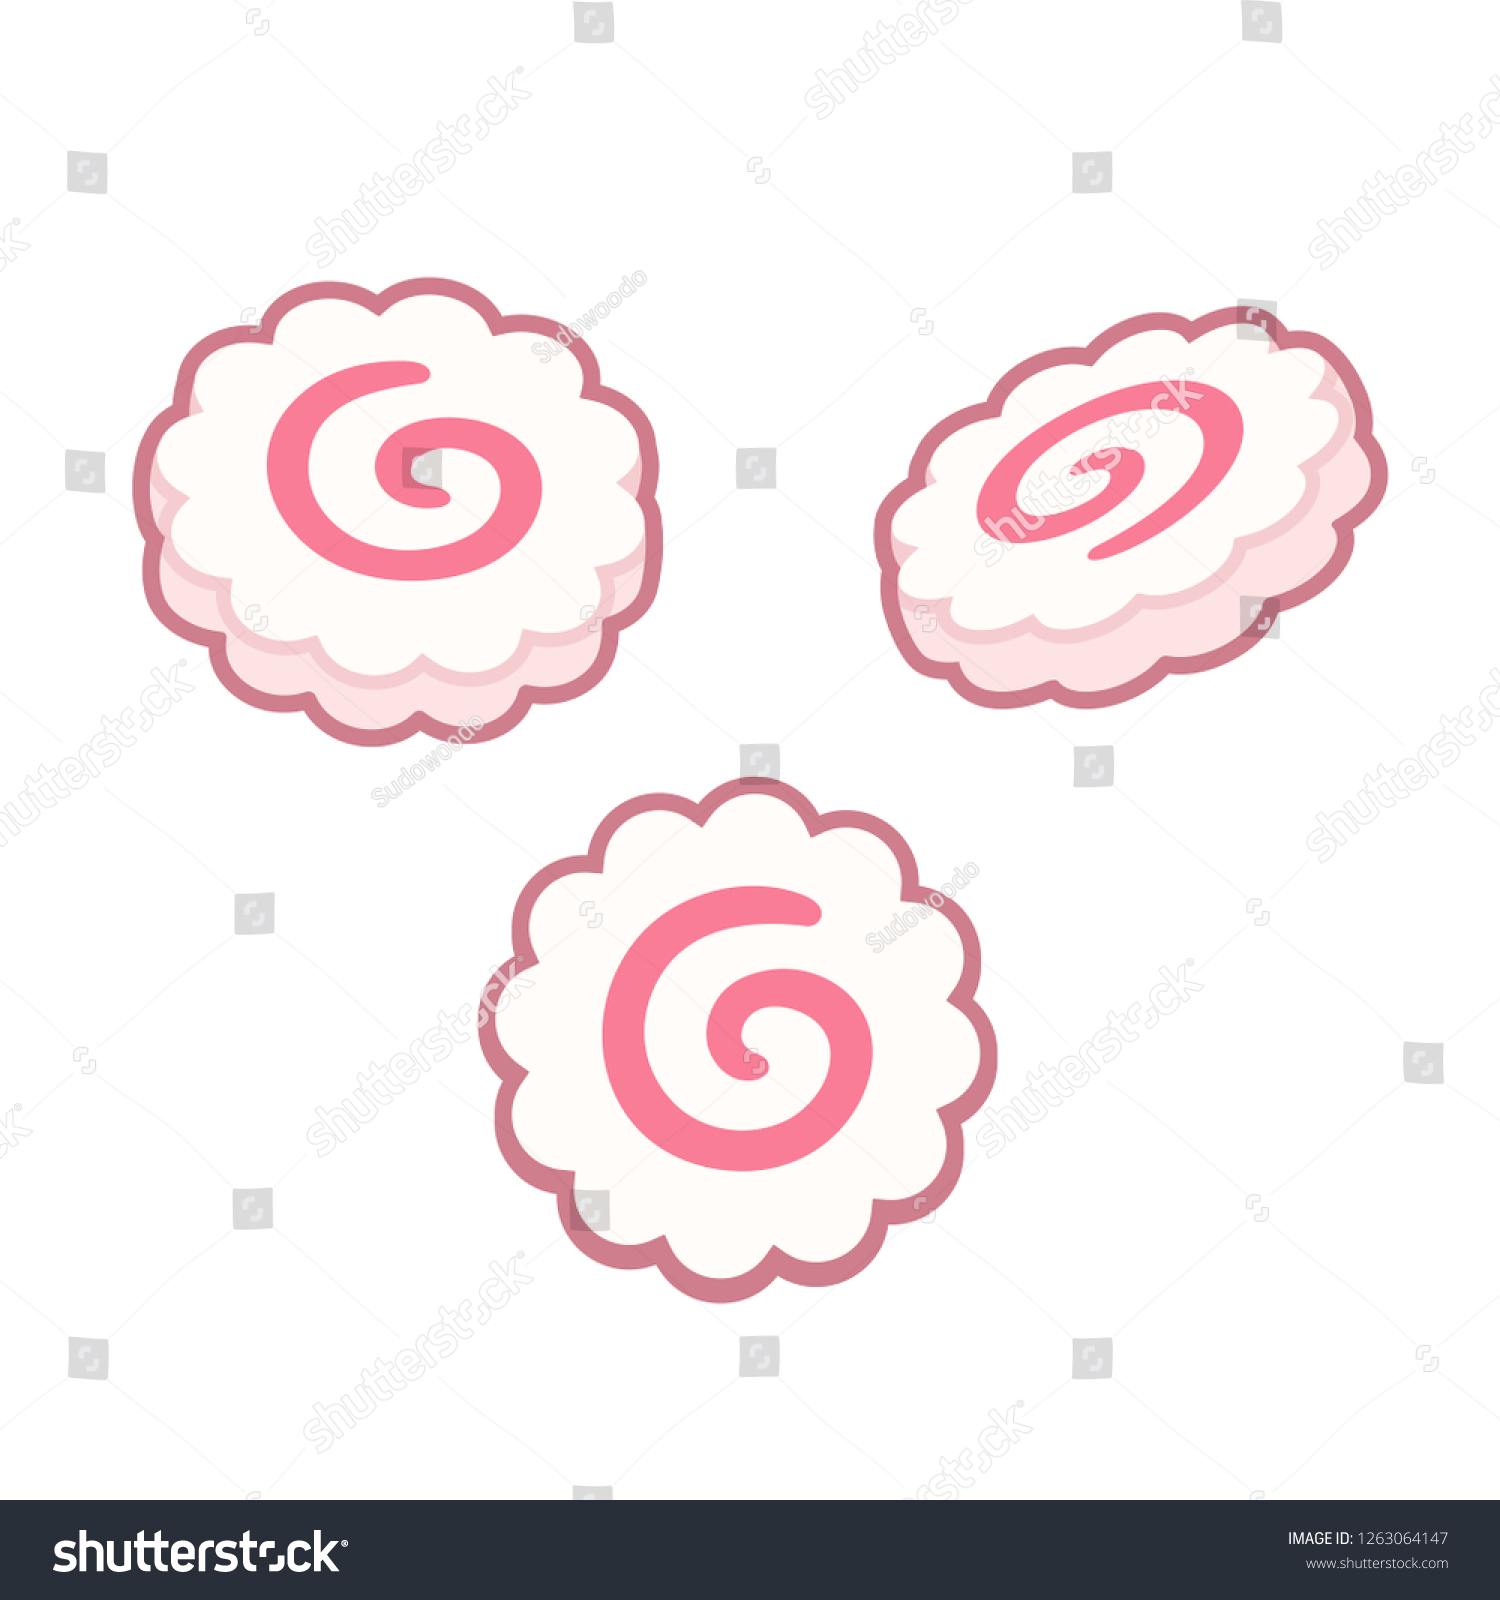 SVG of Narutomaki, Japanese surimi fish cakes. Isolated vector illustration. svg